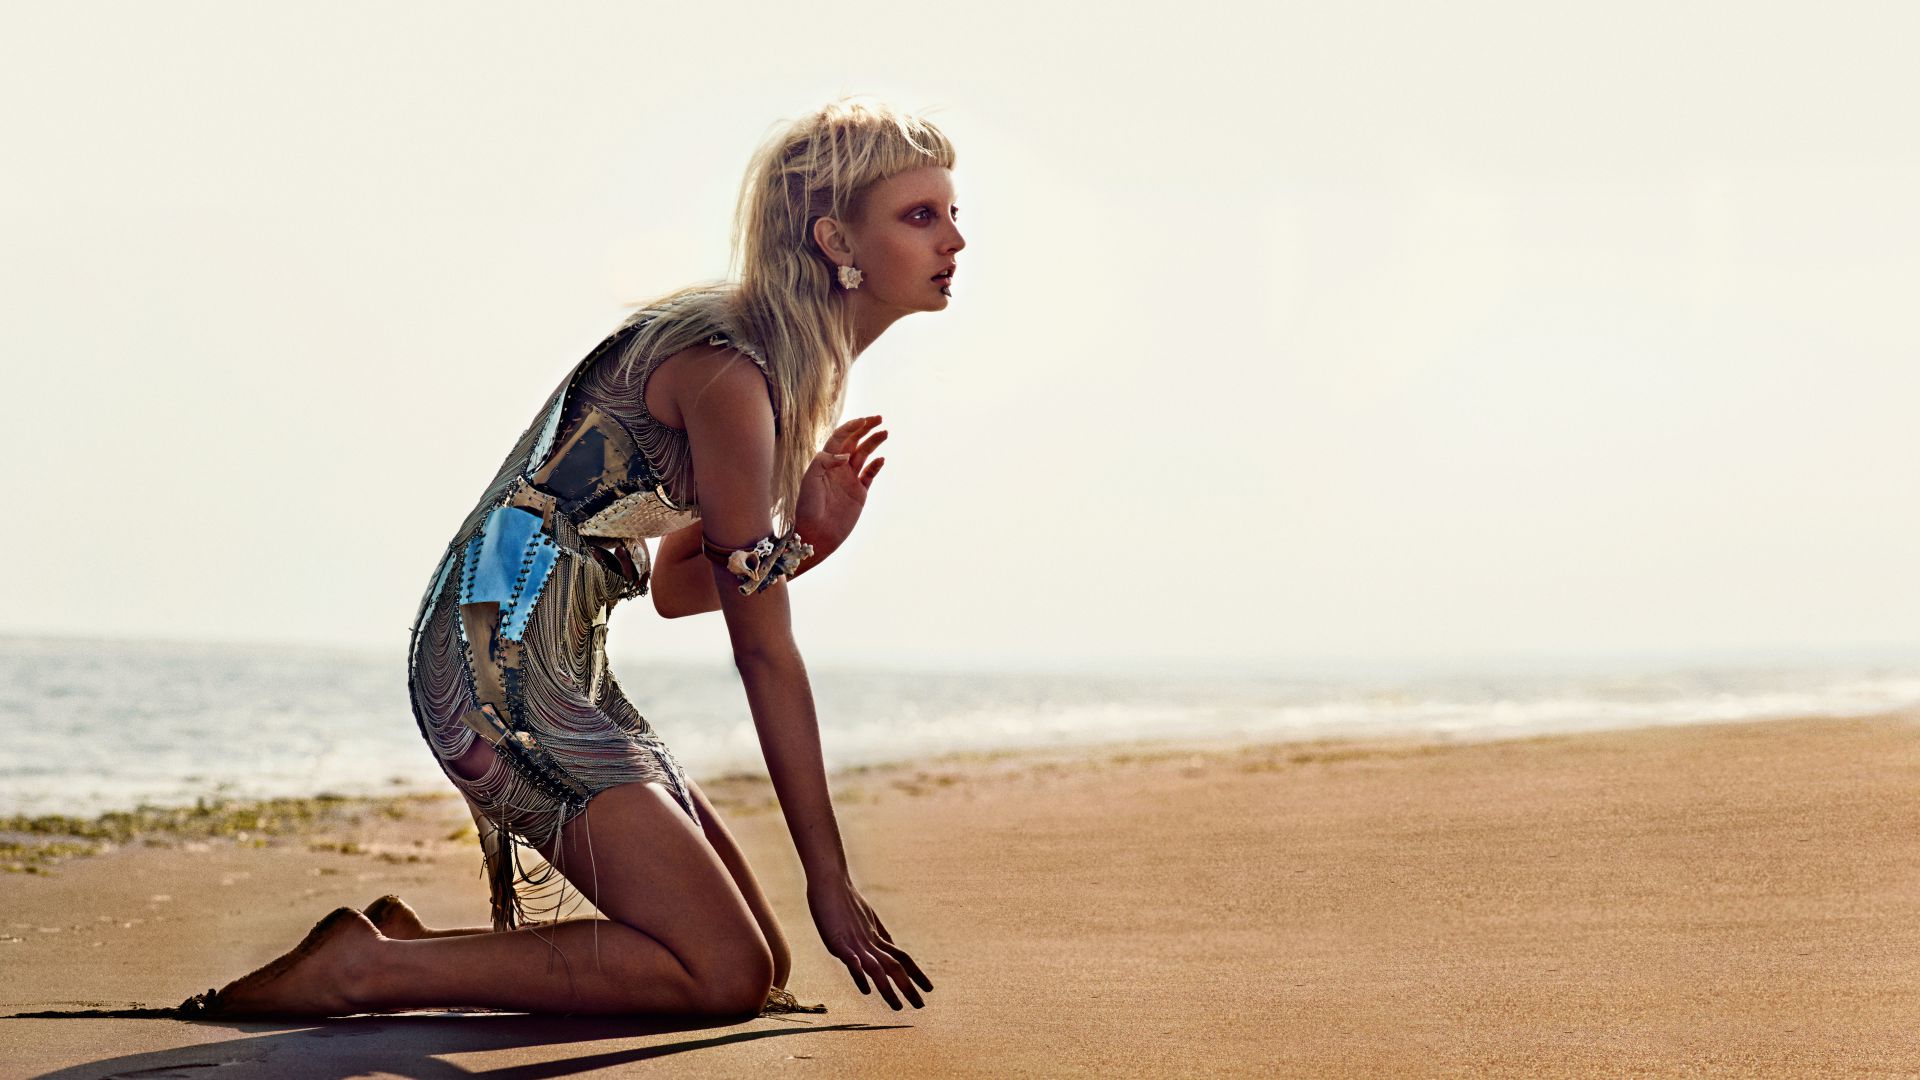 Codie Young, Top Fashion Models, model, blonde, beach (horizontal)